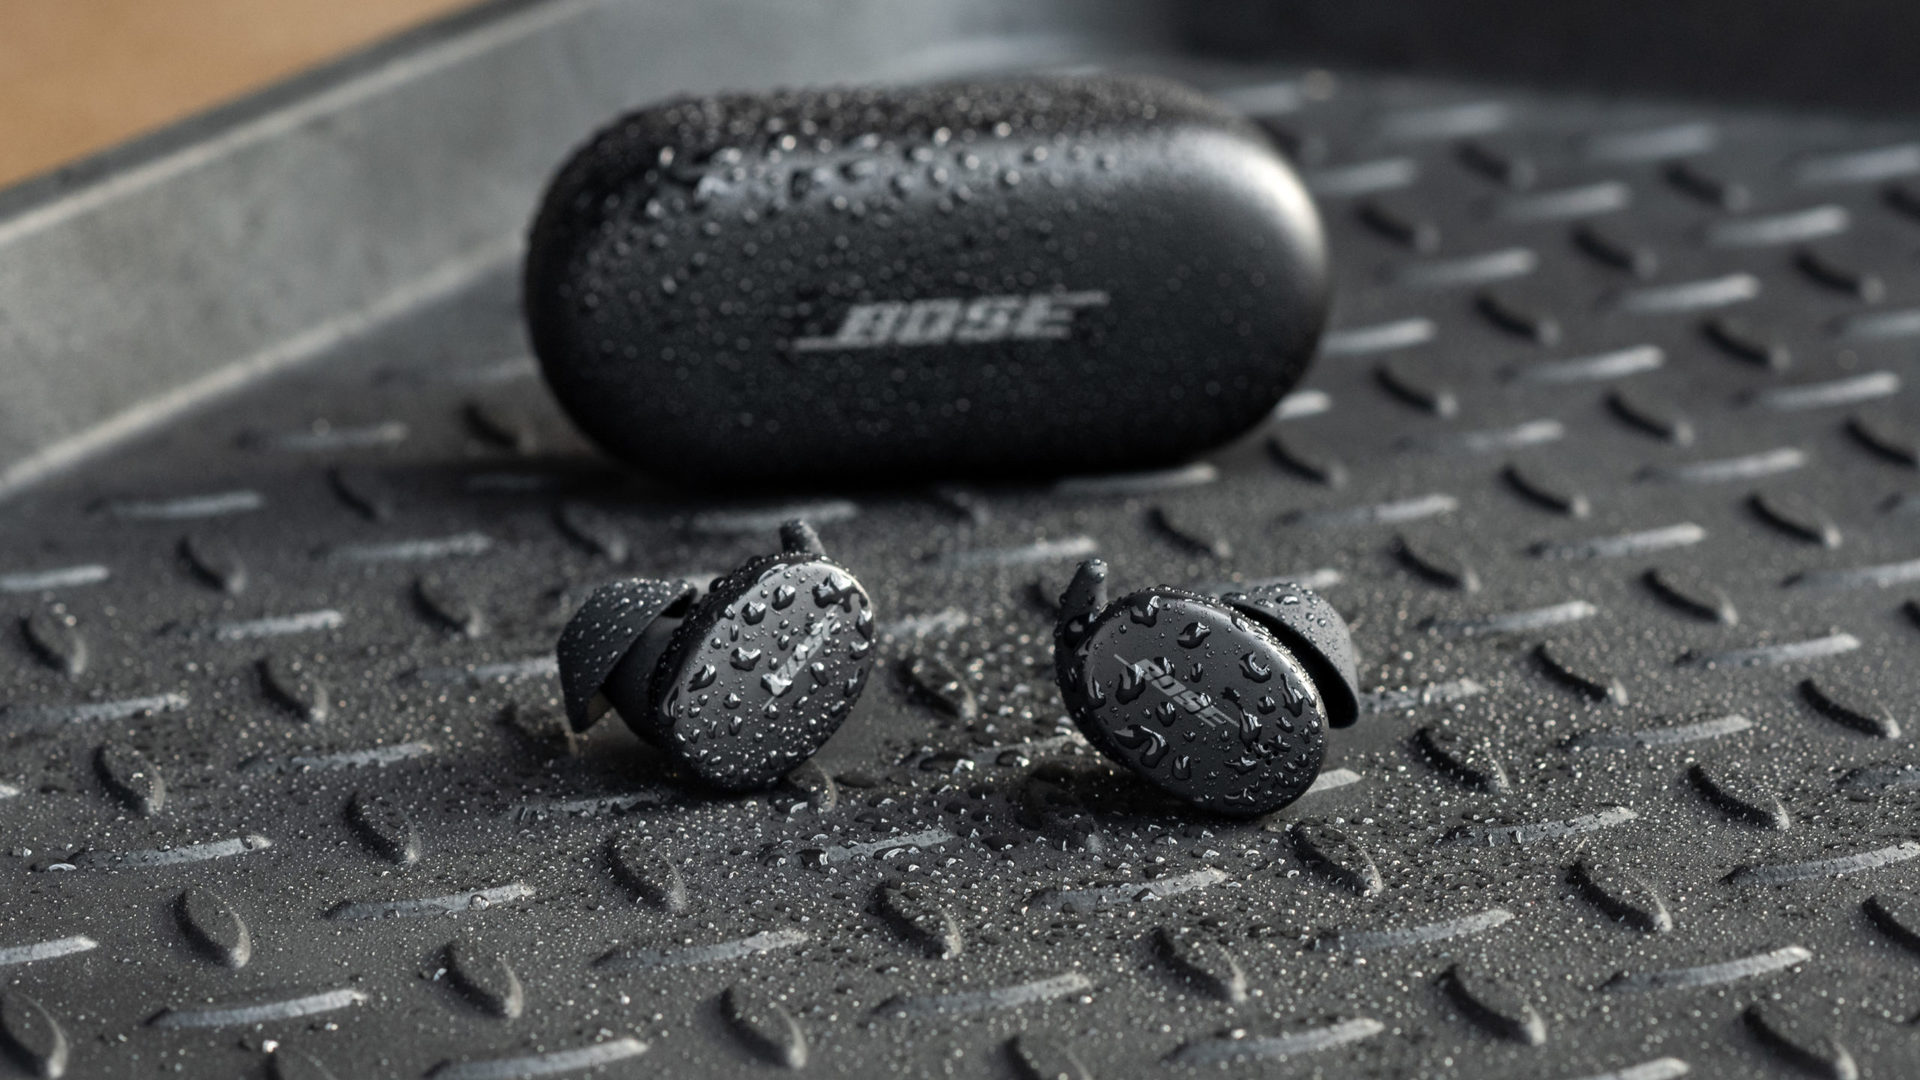 The Bose Sport Earbuds true wireless workout headphones are outside the sealed charging case, and all things are covered in splashes of water.